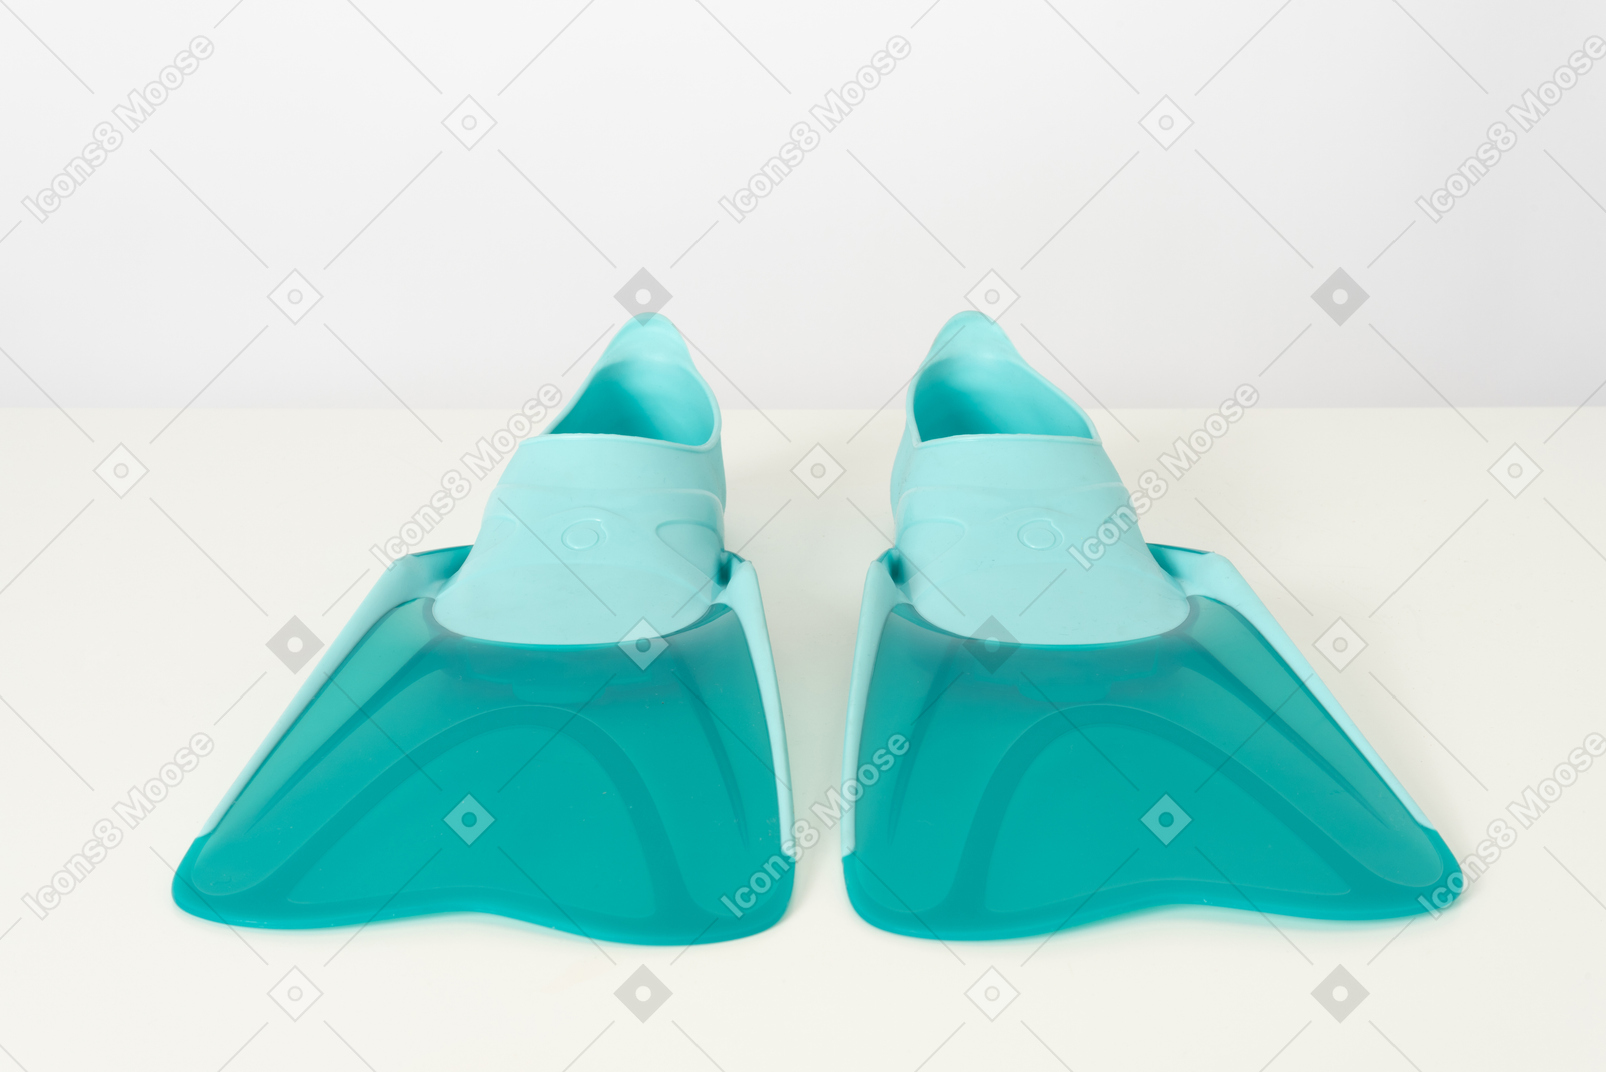 Blue swimming fins on a white background